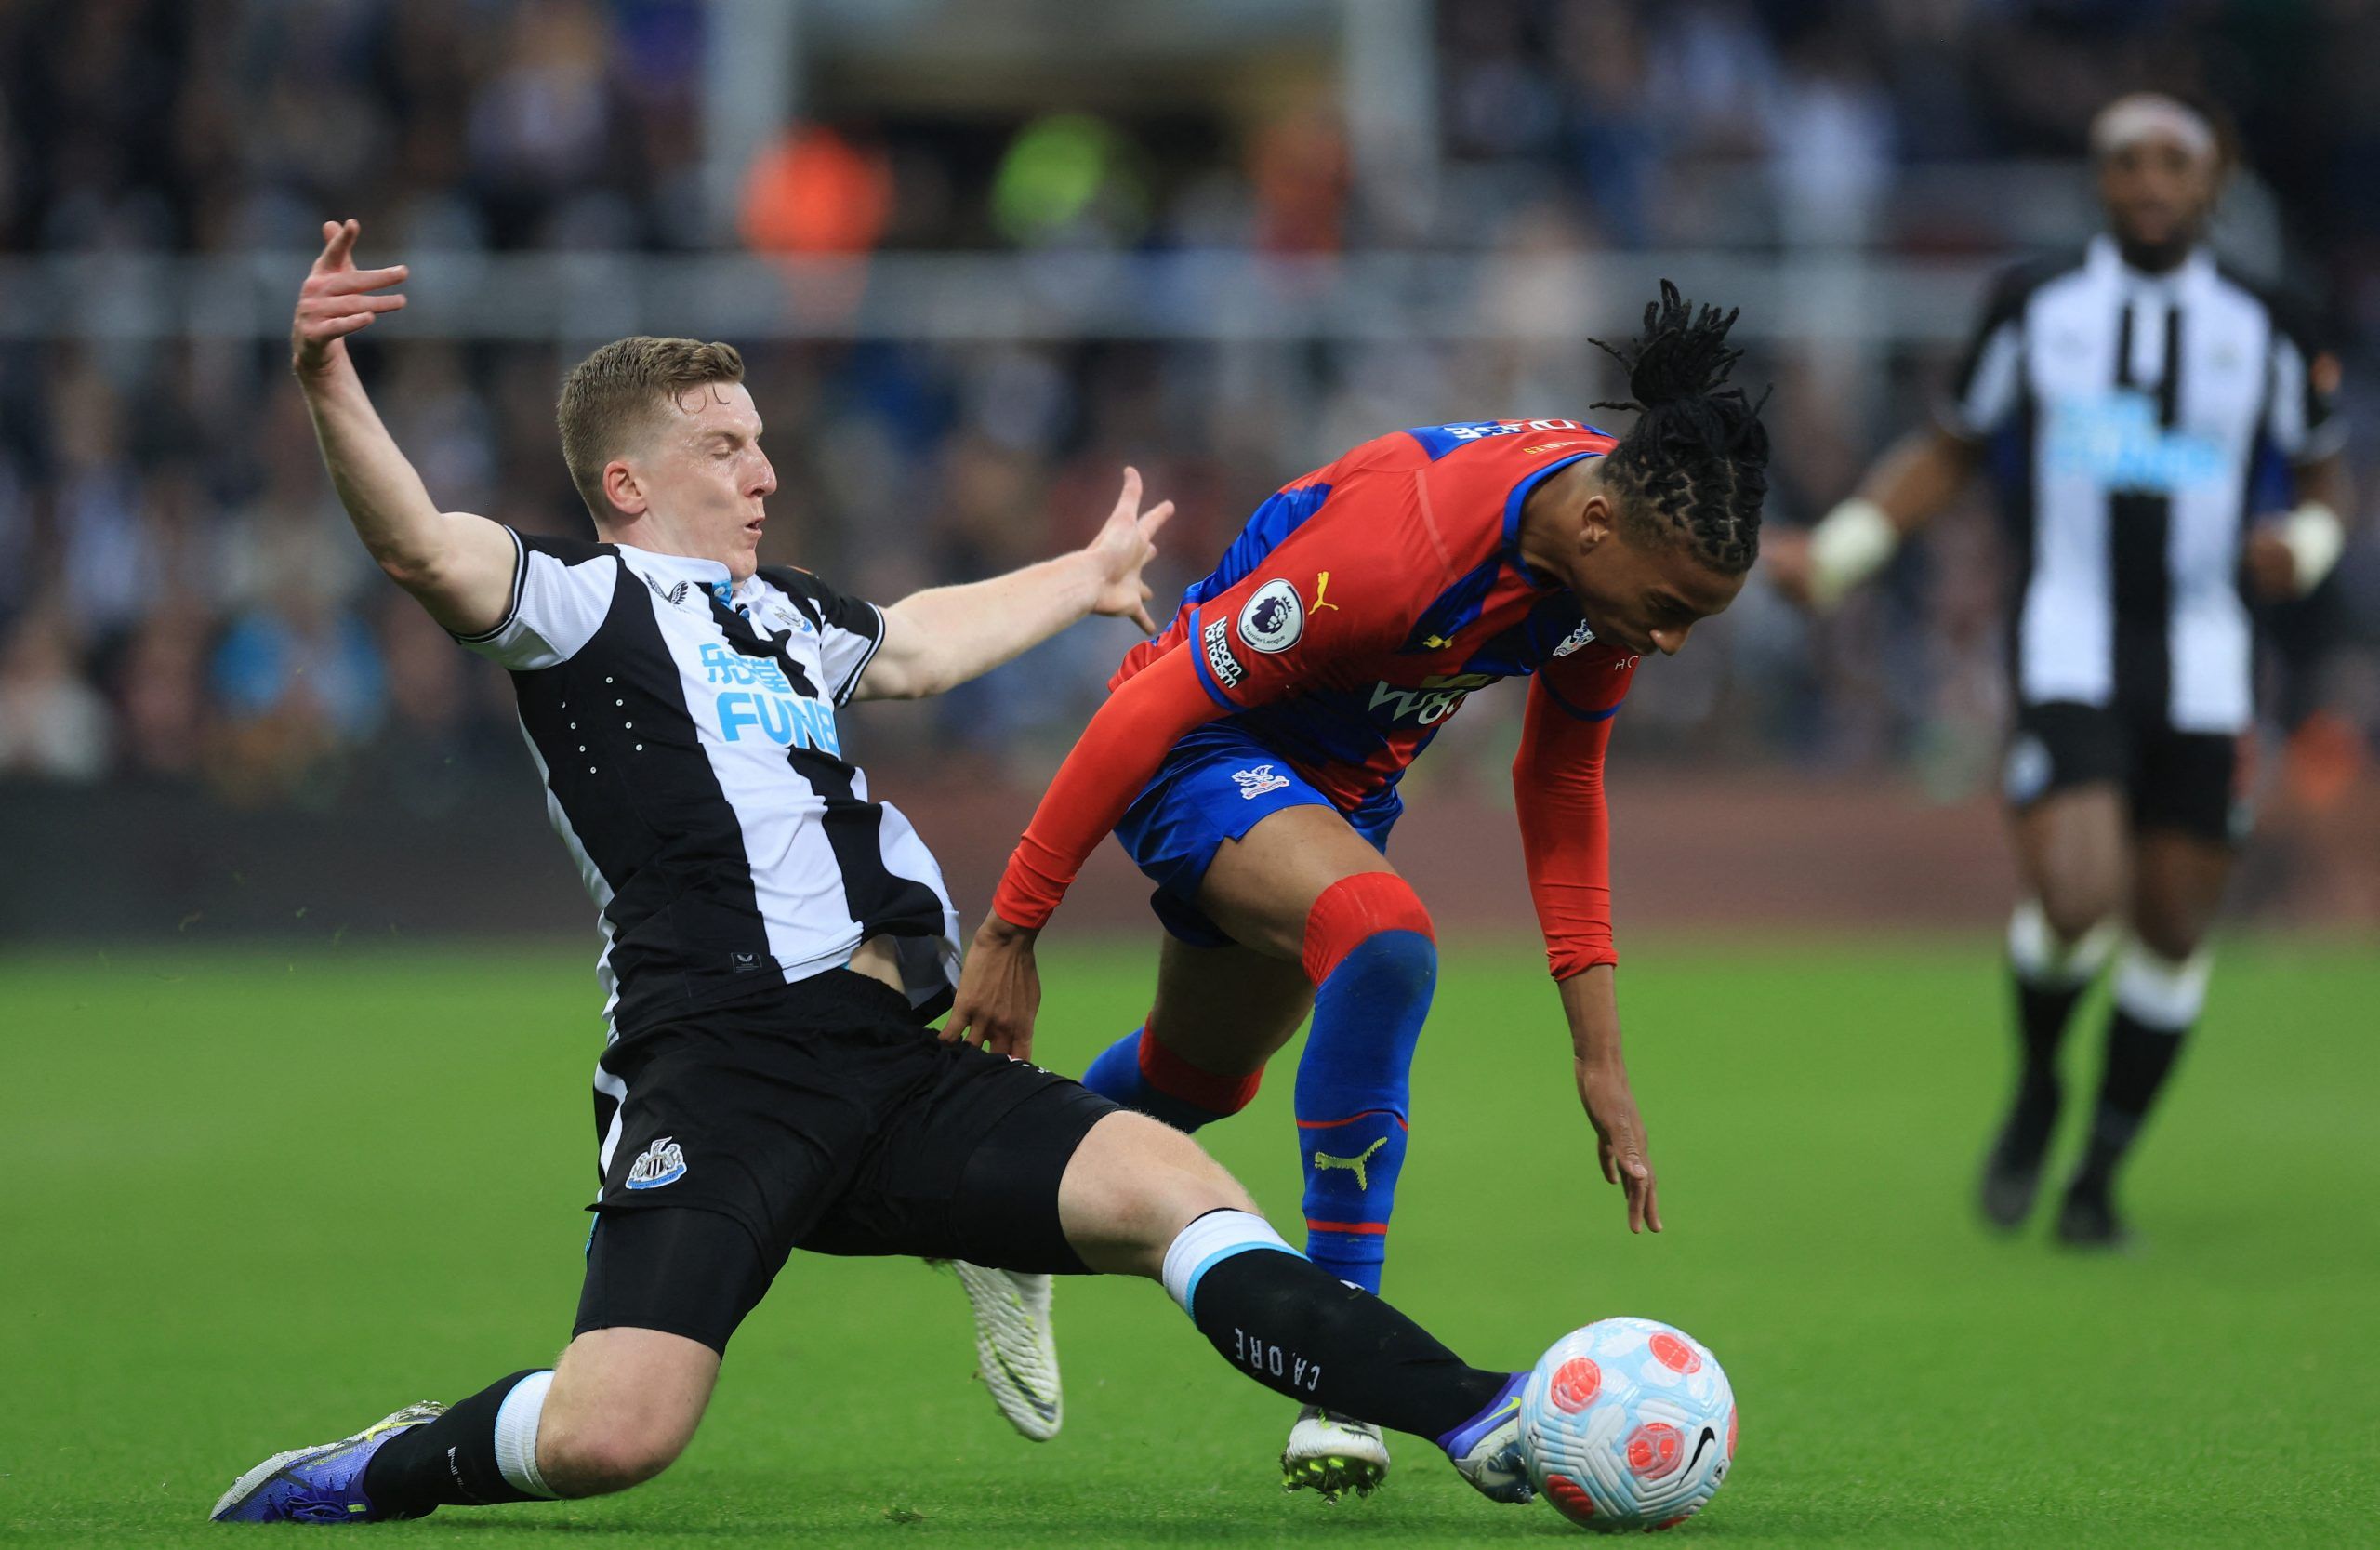 matt-targett-newcastle-united-wolves-wolverhampton-wanderers-transfer-news-bruno-lage-steven-gerrard-transfer-latestSoccer Football - Premier League - Newcastle United v Crystal Palace - St James' Park, Newcastle, Britain - April 20, 2022 Newcastle United's Matt Targett in action with Crystal Palace's Michael Olise Action Images via Reuters/Lee Smith EDITORIAL USE ONLY. No use with unauthorized audio, video, data, fixture lists, club/league logos or 'live' services. Online in-match use limited t